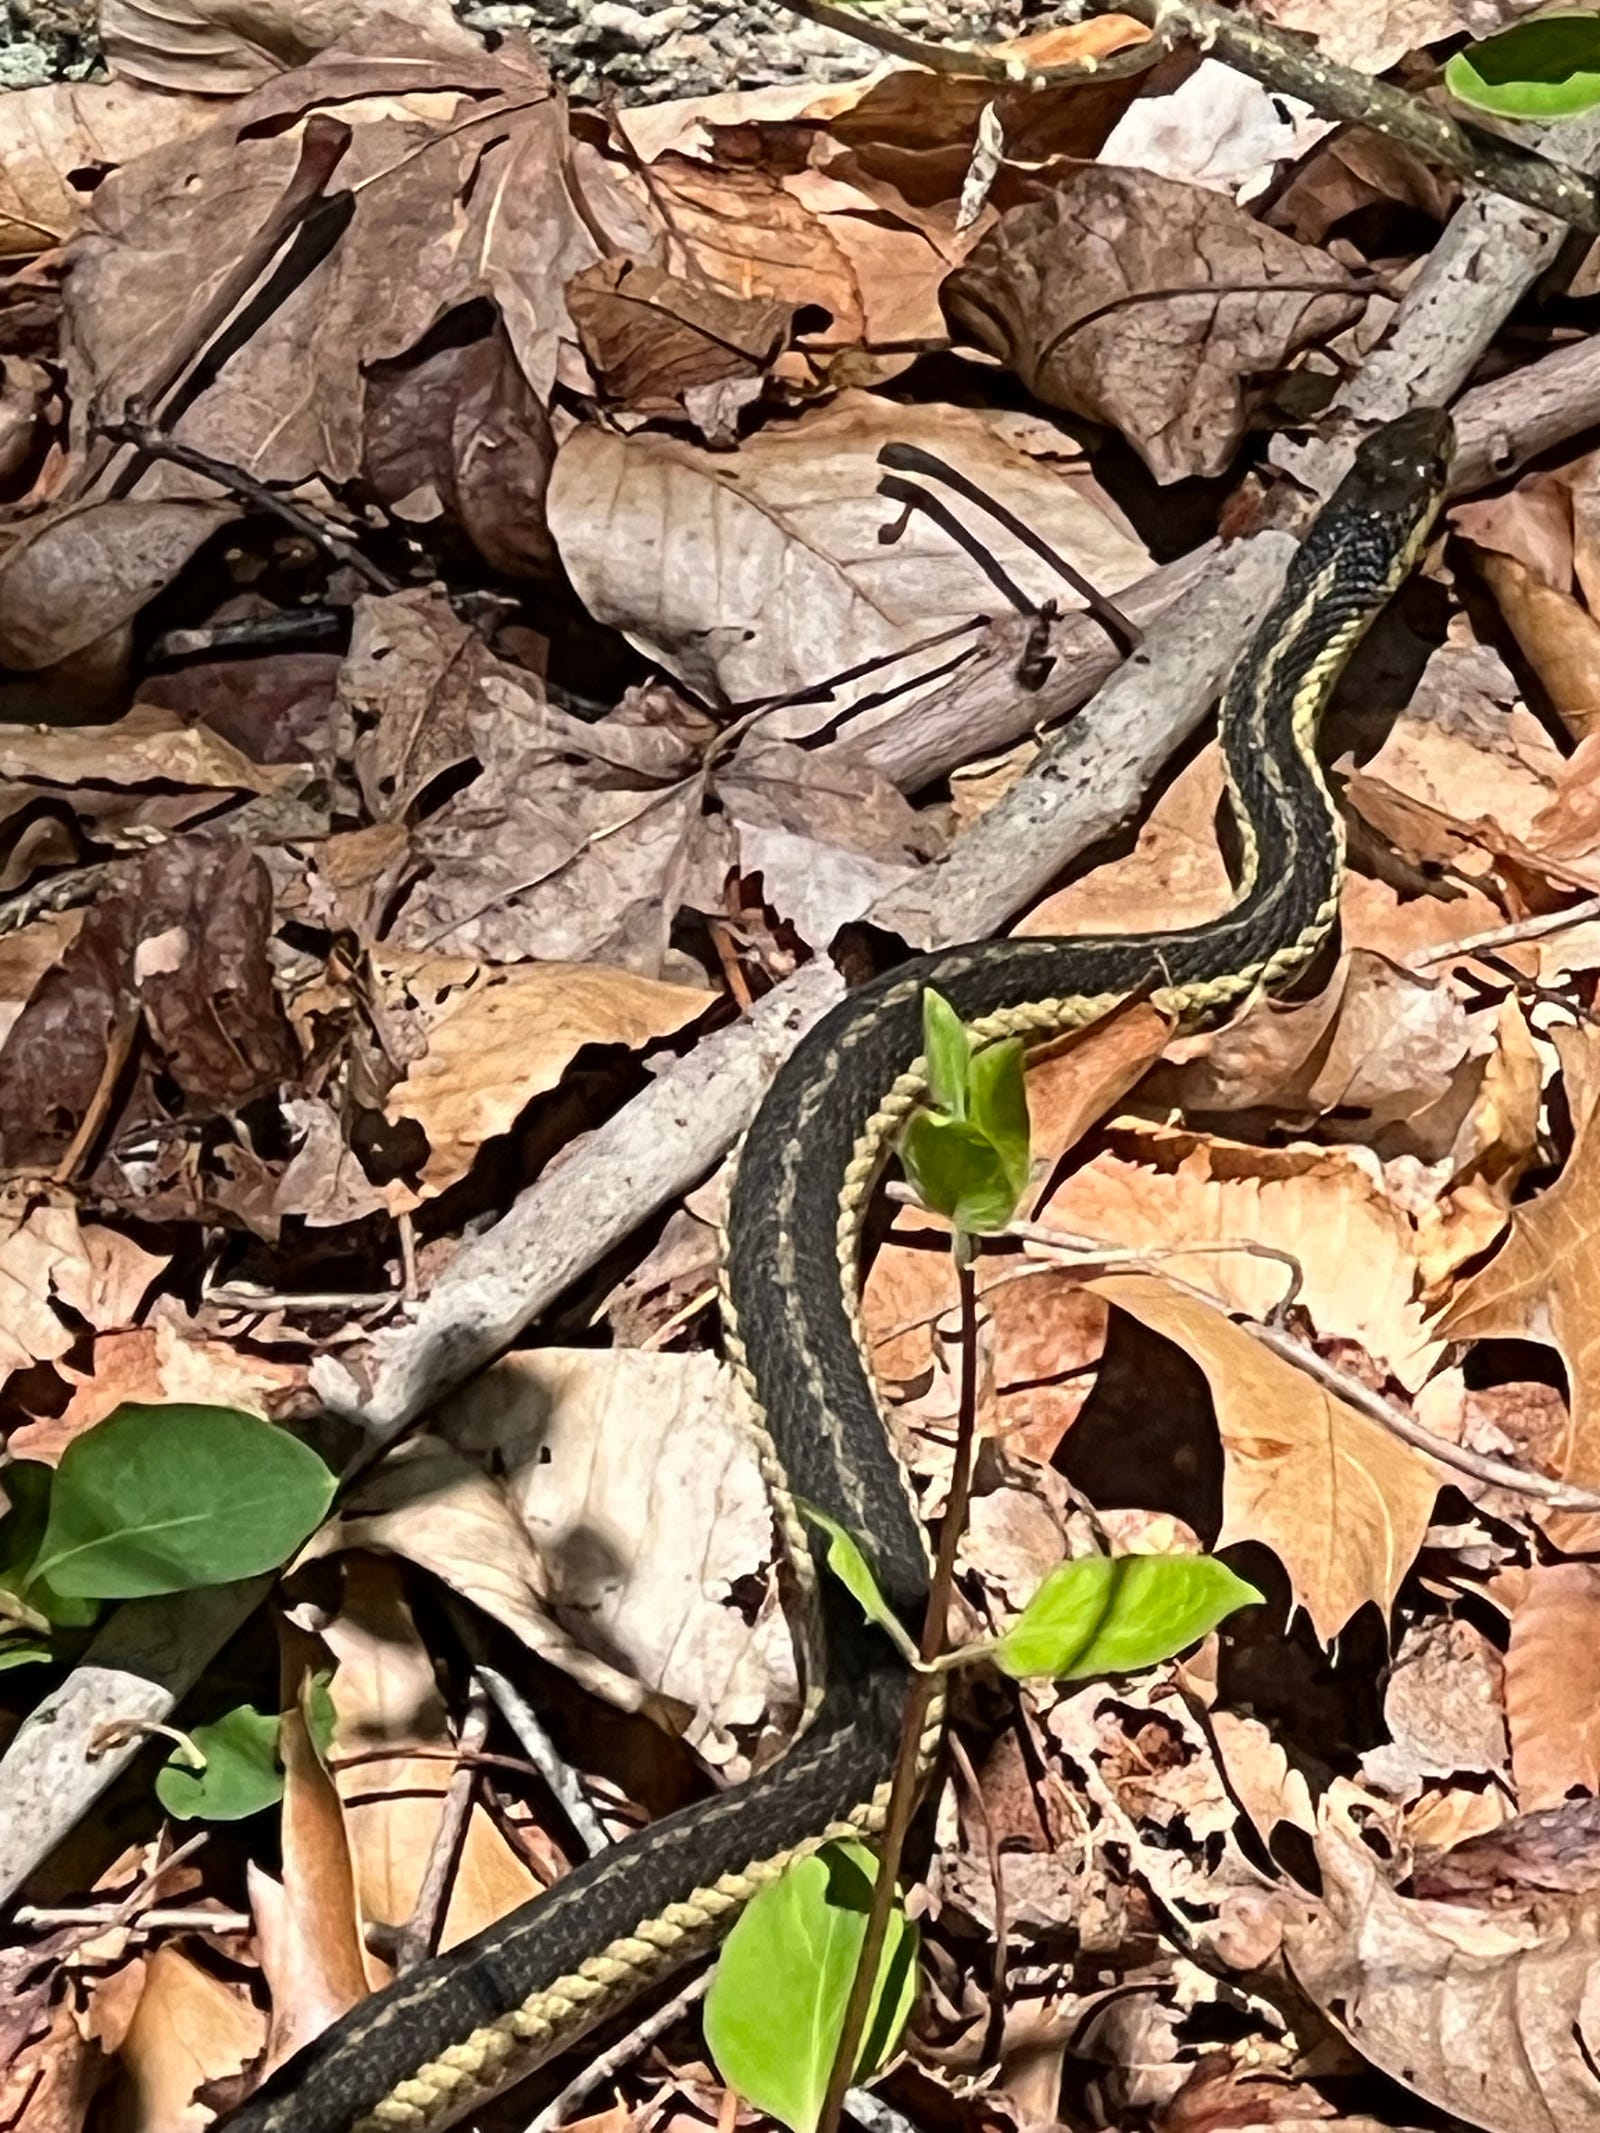 A ribbon snake in the early spring spotted in the Merritt Family Forest, Mystic, CT